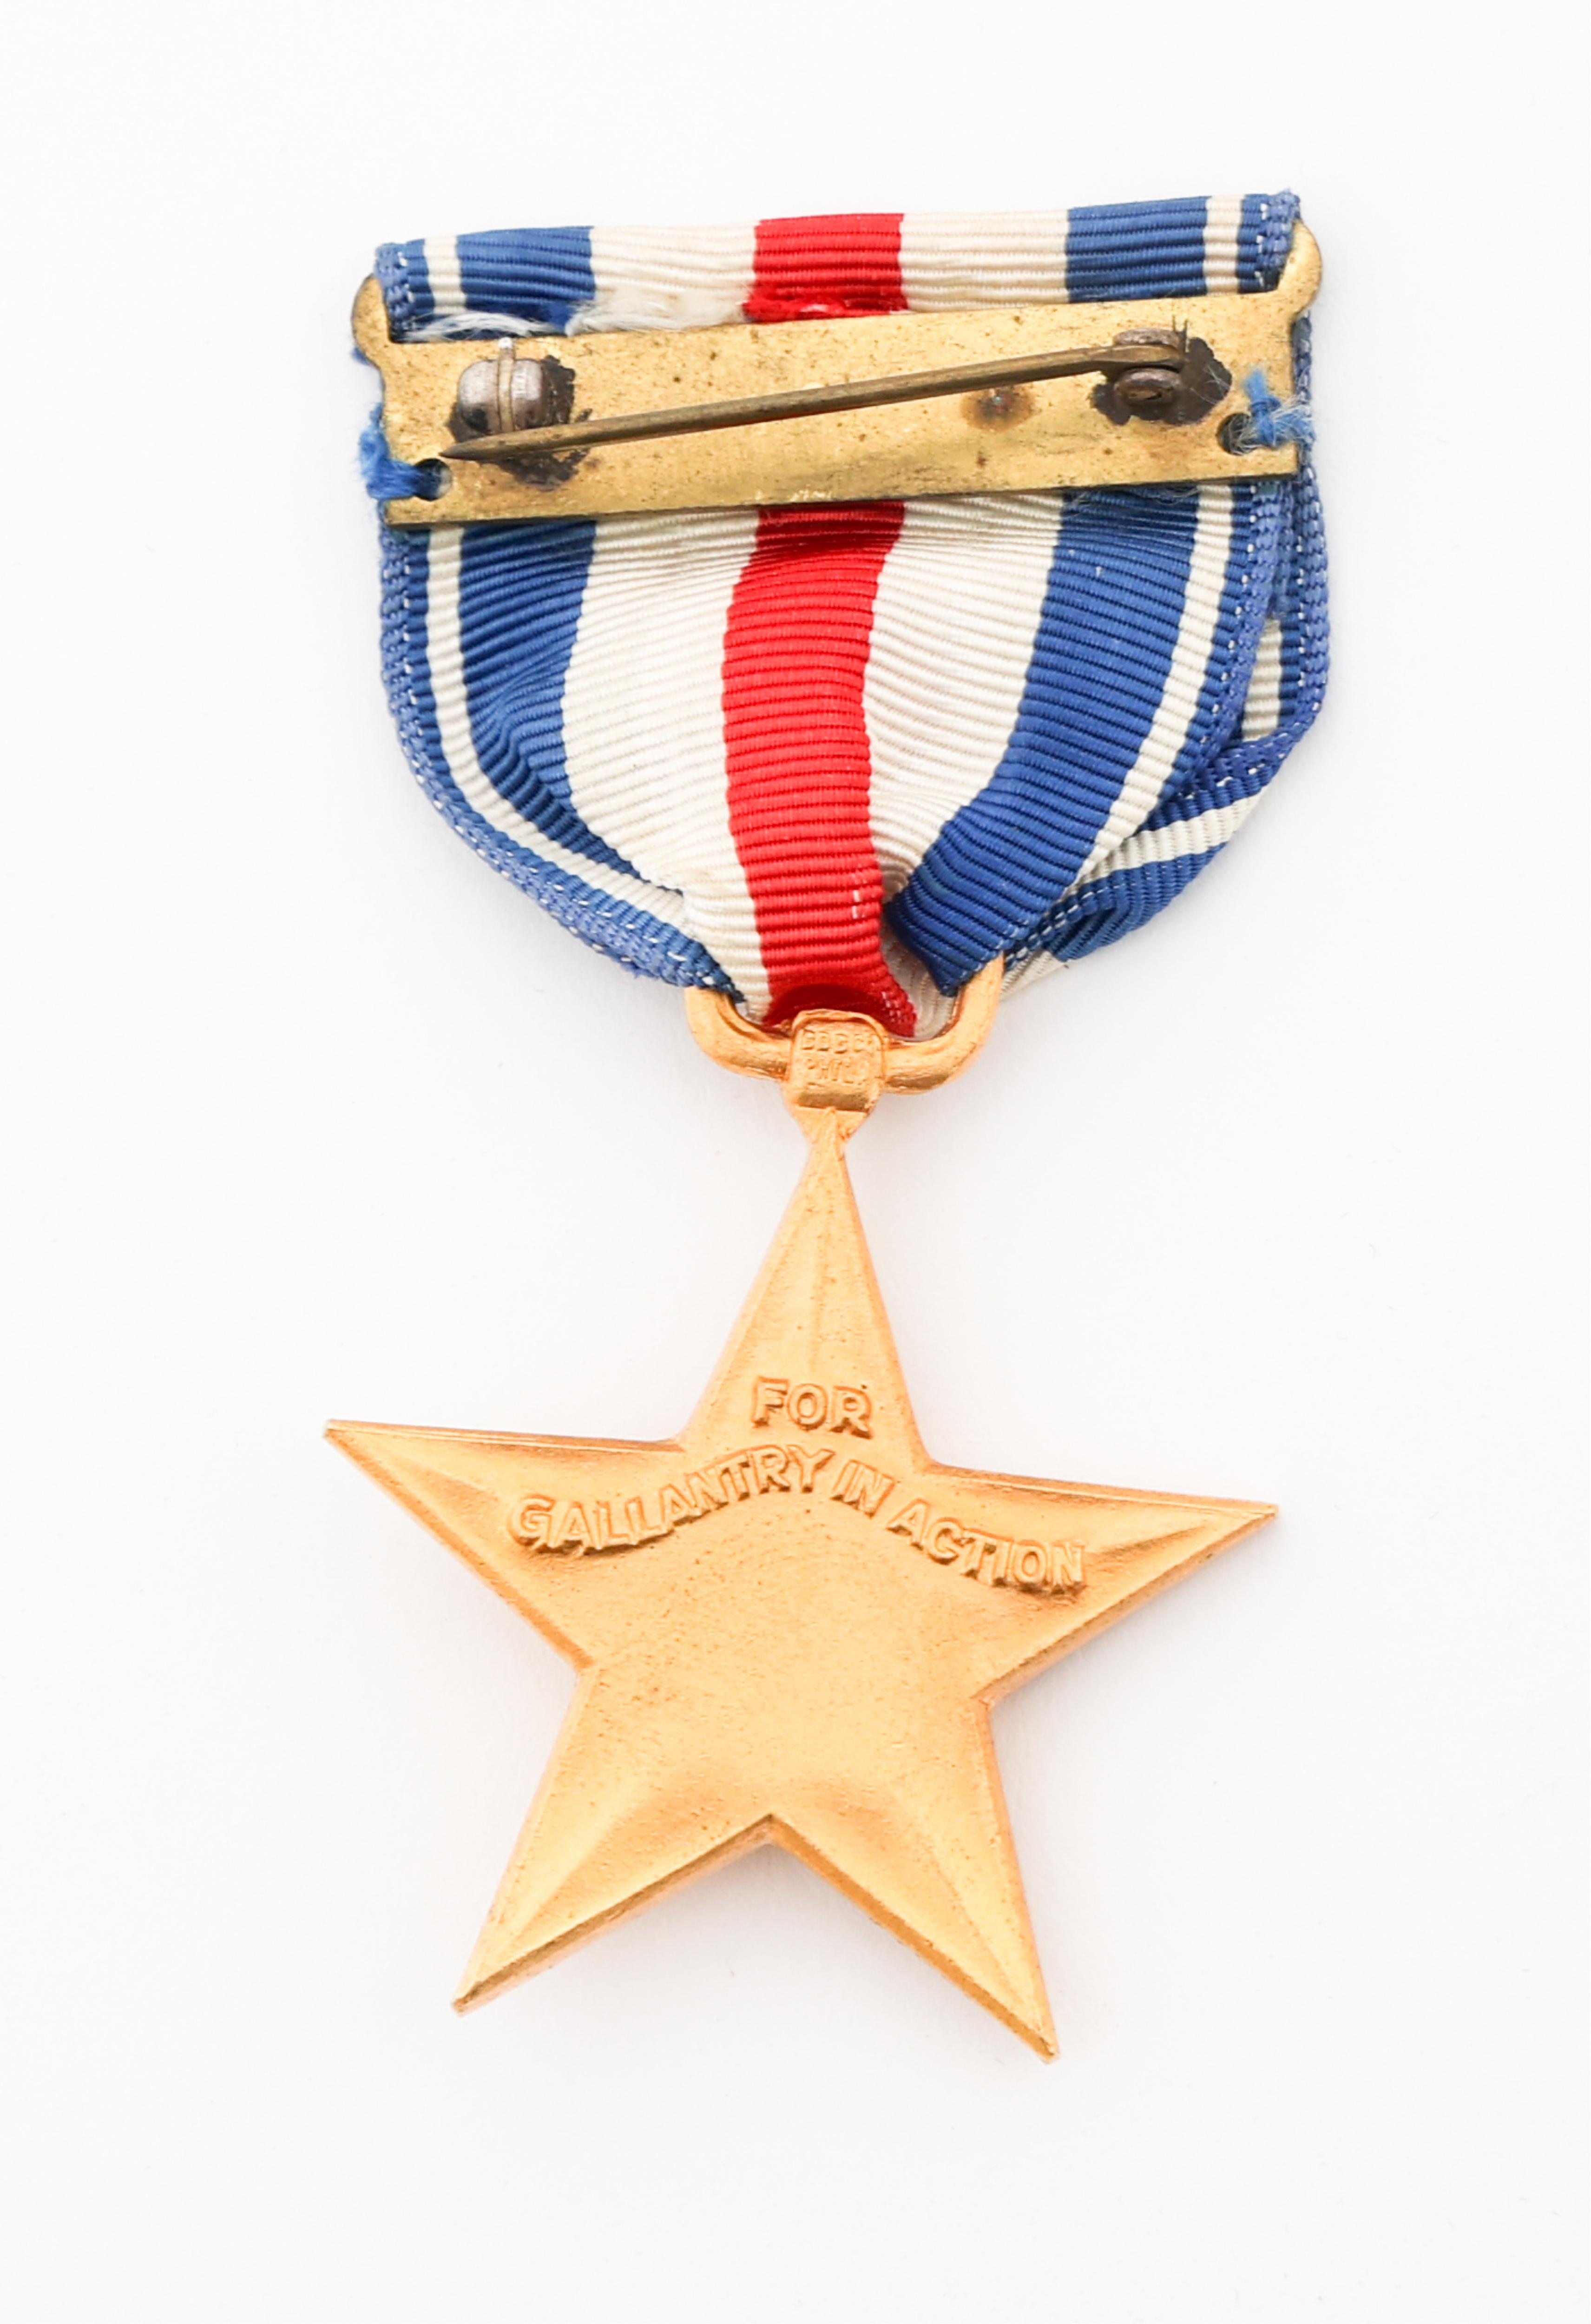 WWII - KOREAN WAR US ARMY NAMED MEDALS